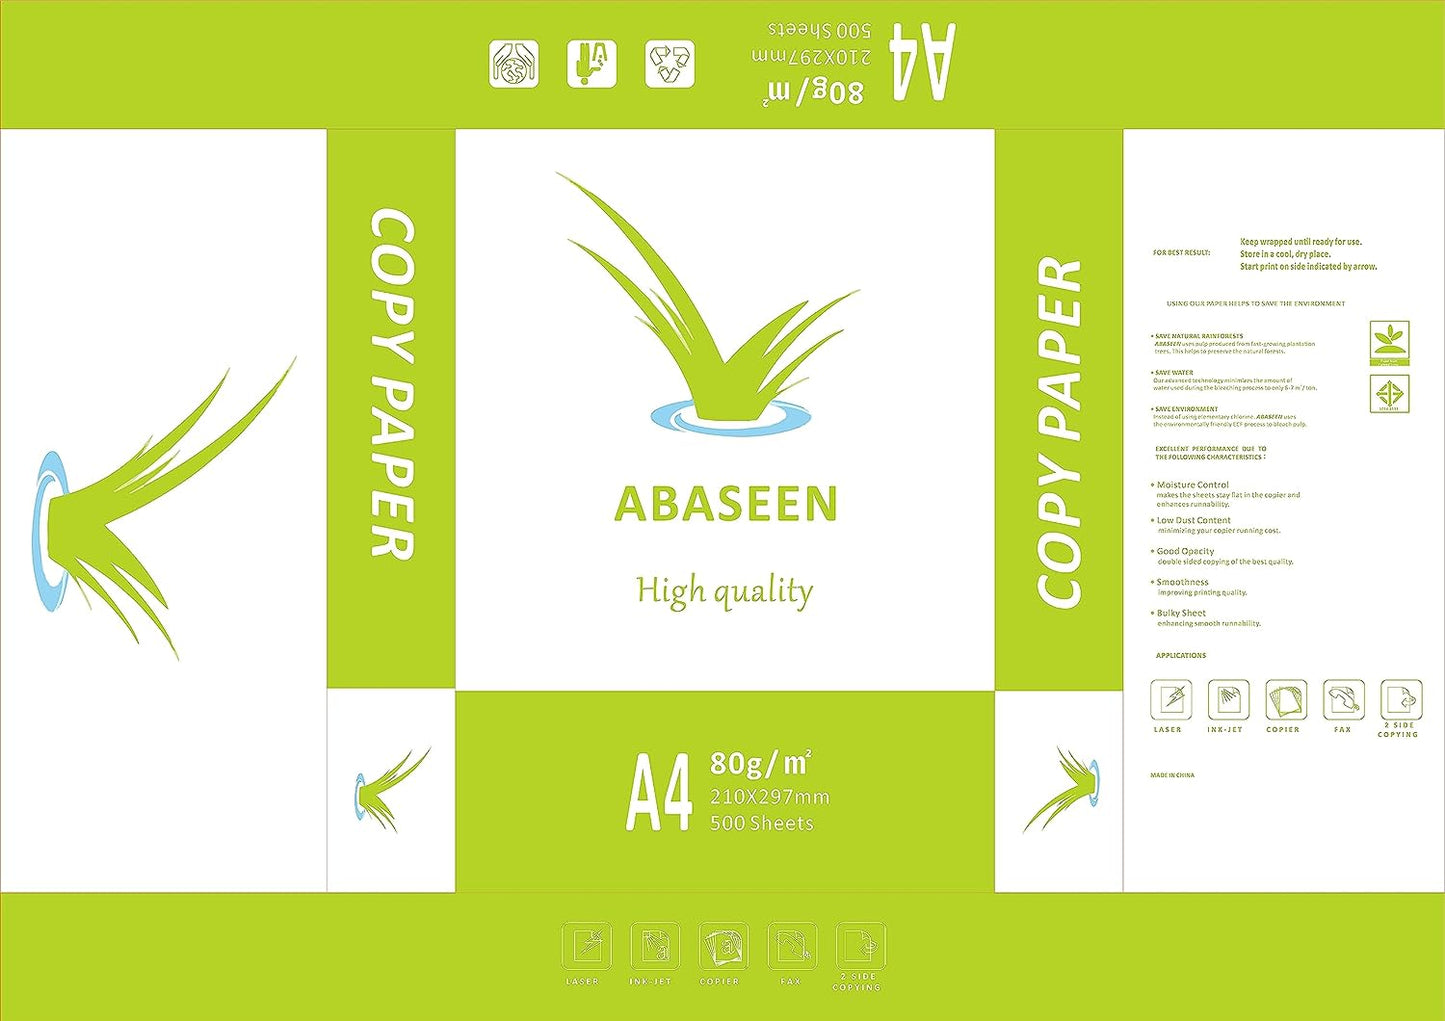 Abaseen White - A4 Printing Papers 23